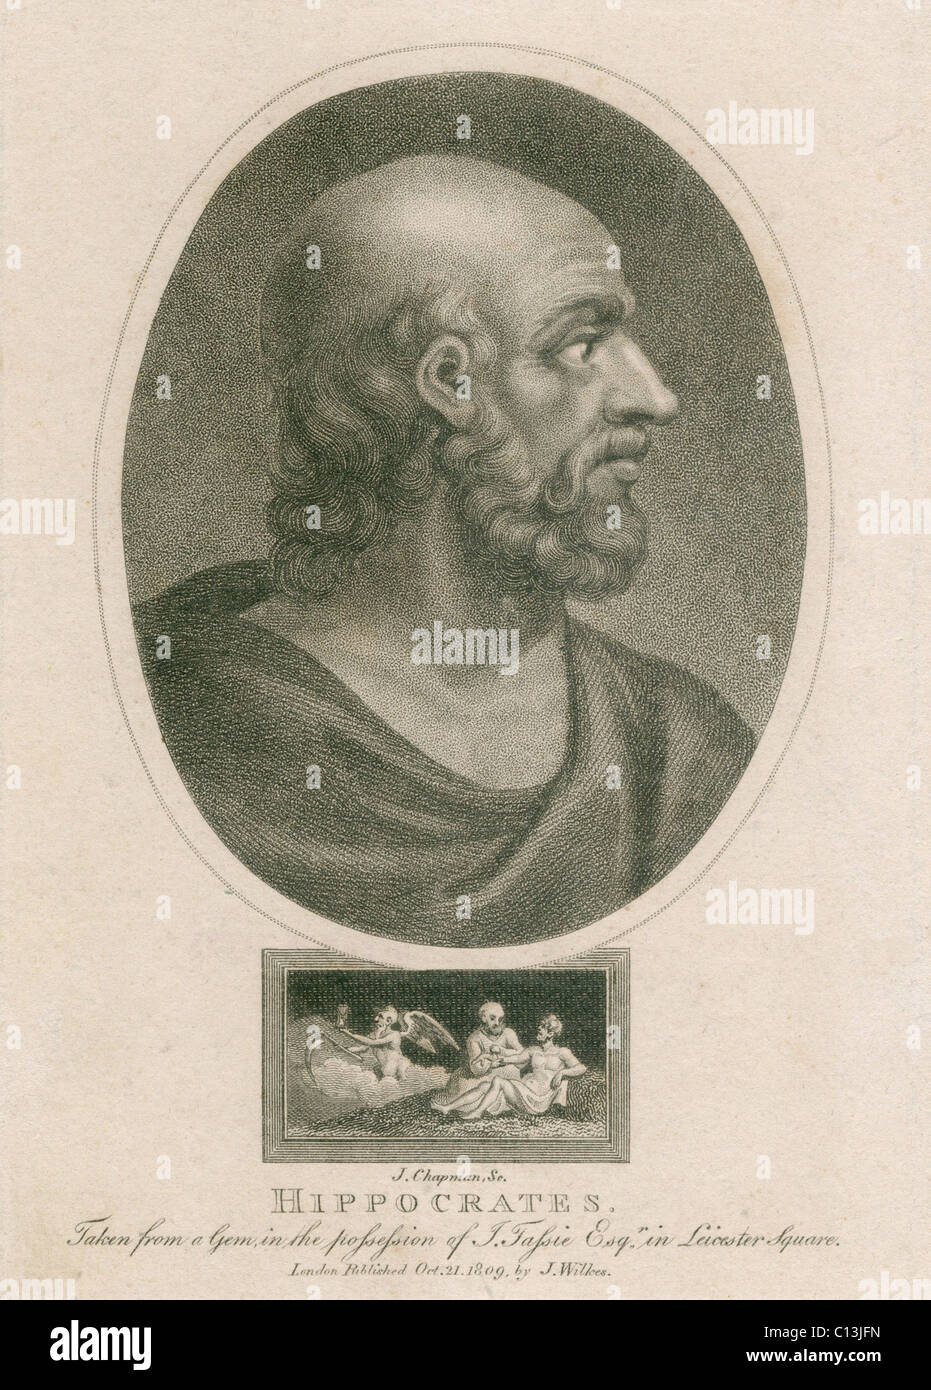 Hippocrates (460-375 BC). Engraving from a ancient gemstone. Ca. 1800 by J. Chapman. Stock Photo